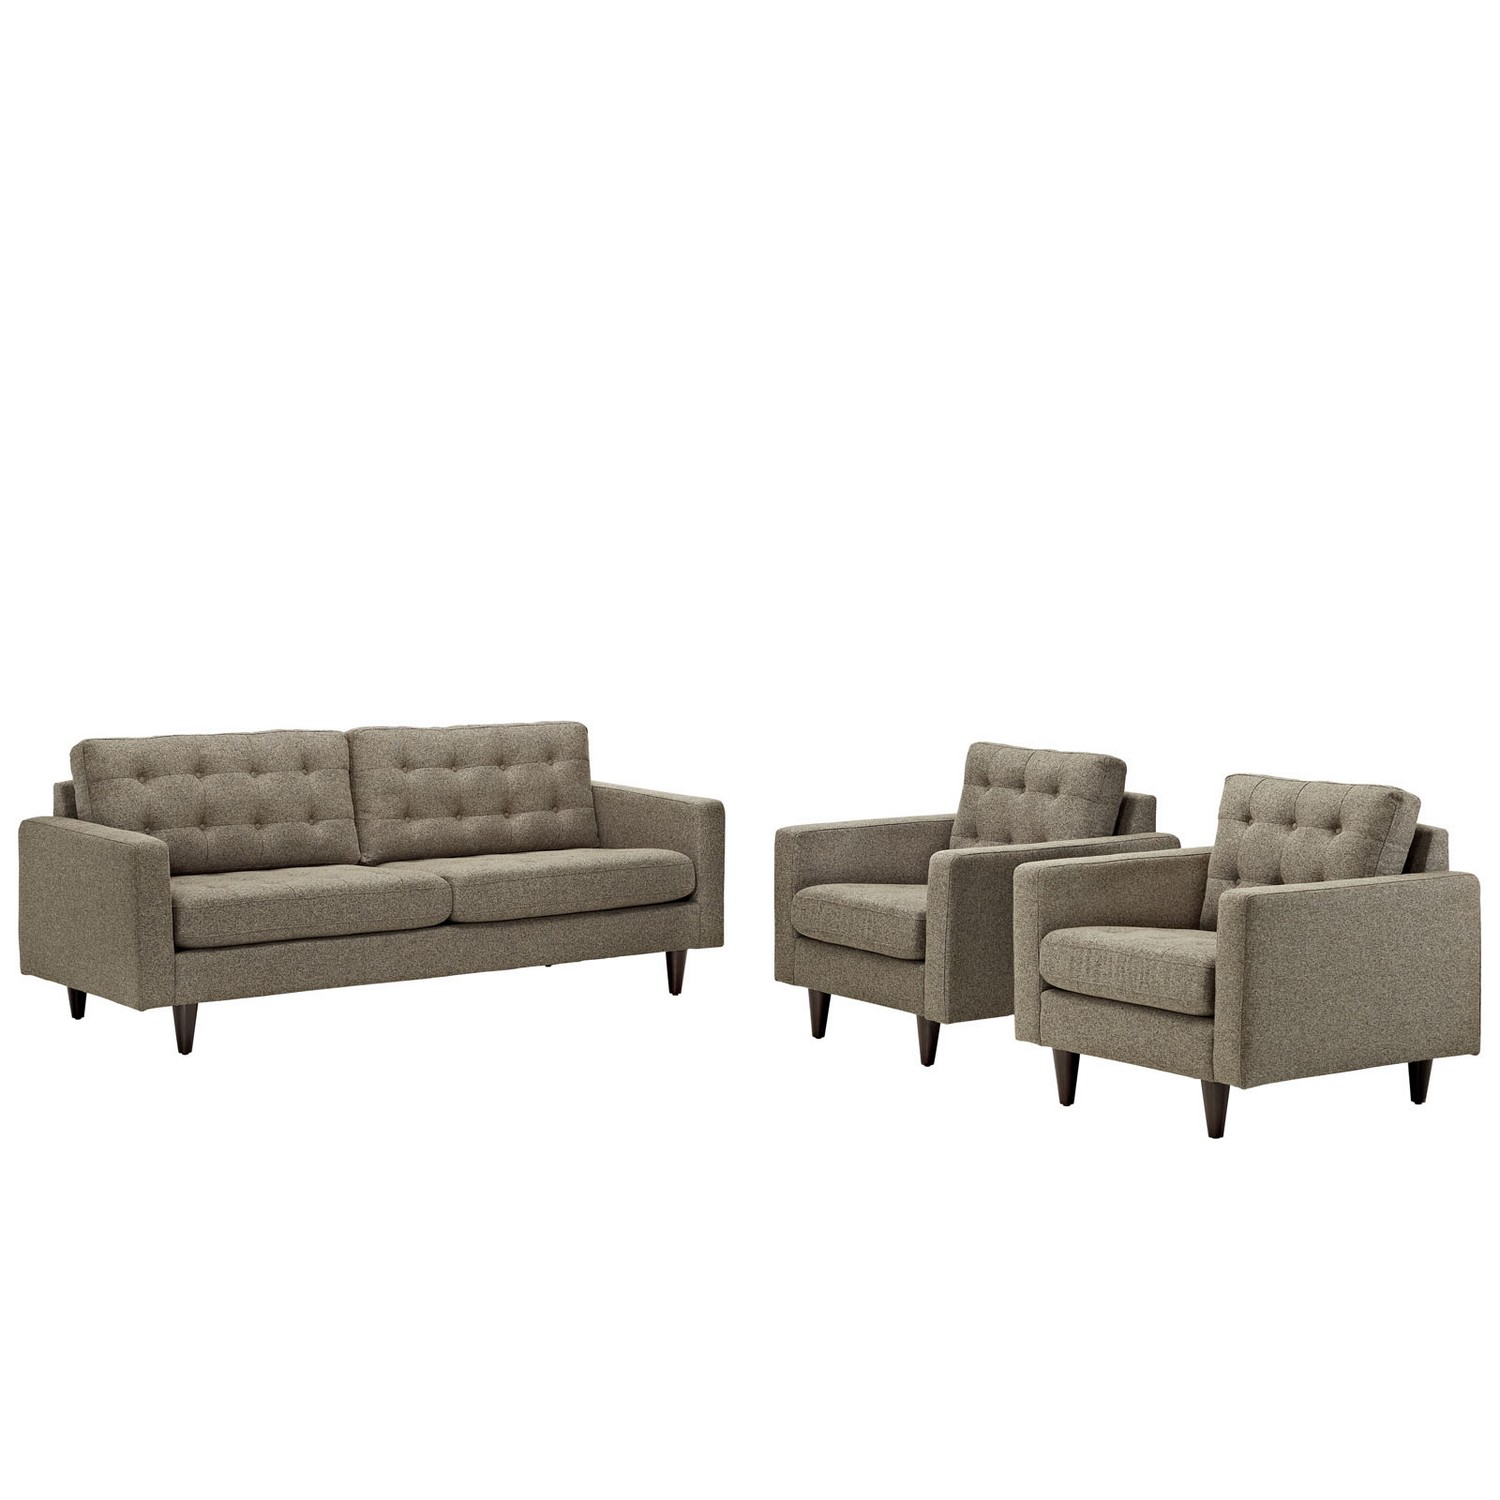 Modway Empress 3PC Sofa and Armchairs Set - Oatmeal